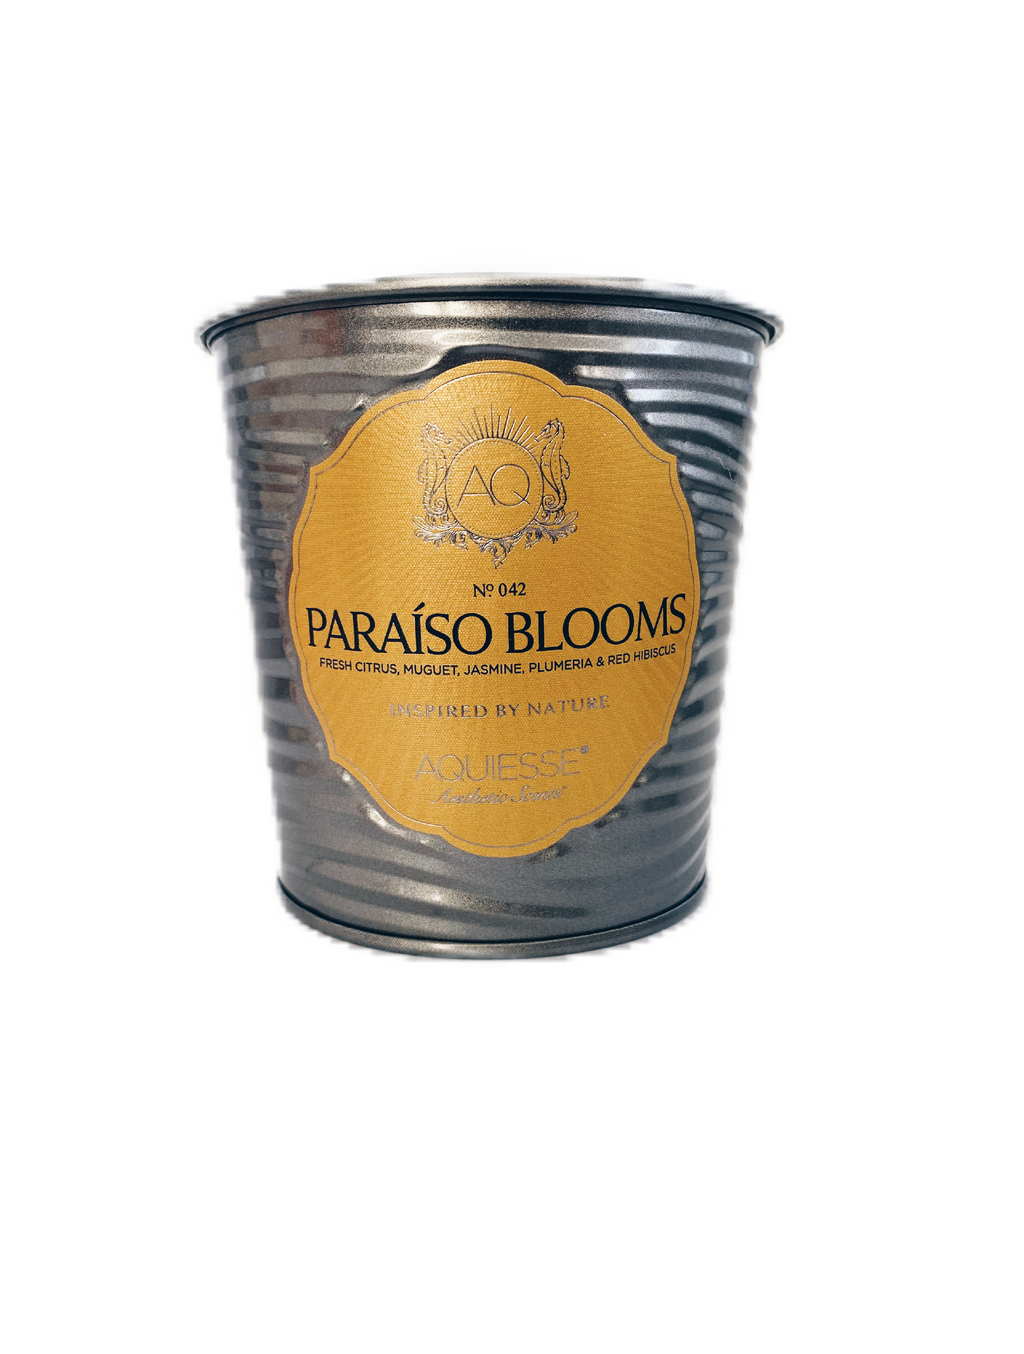 AQUIESSE Fine Tin Candle in Paraiso Blooms No. 042